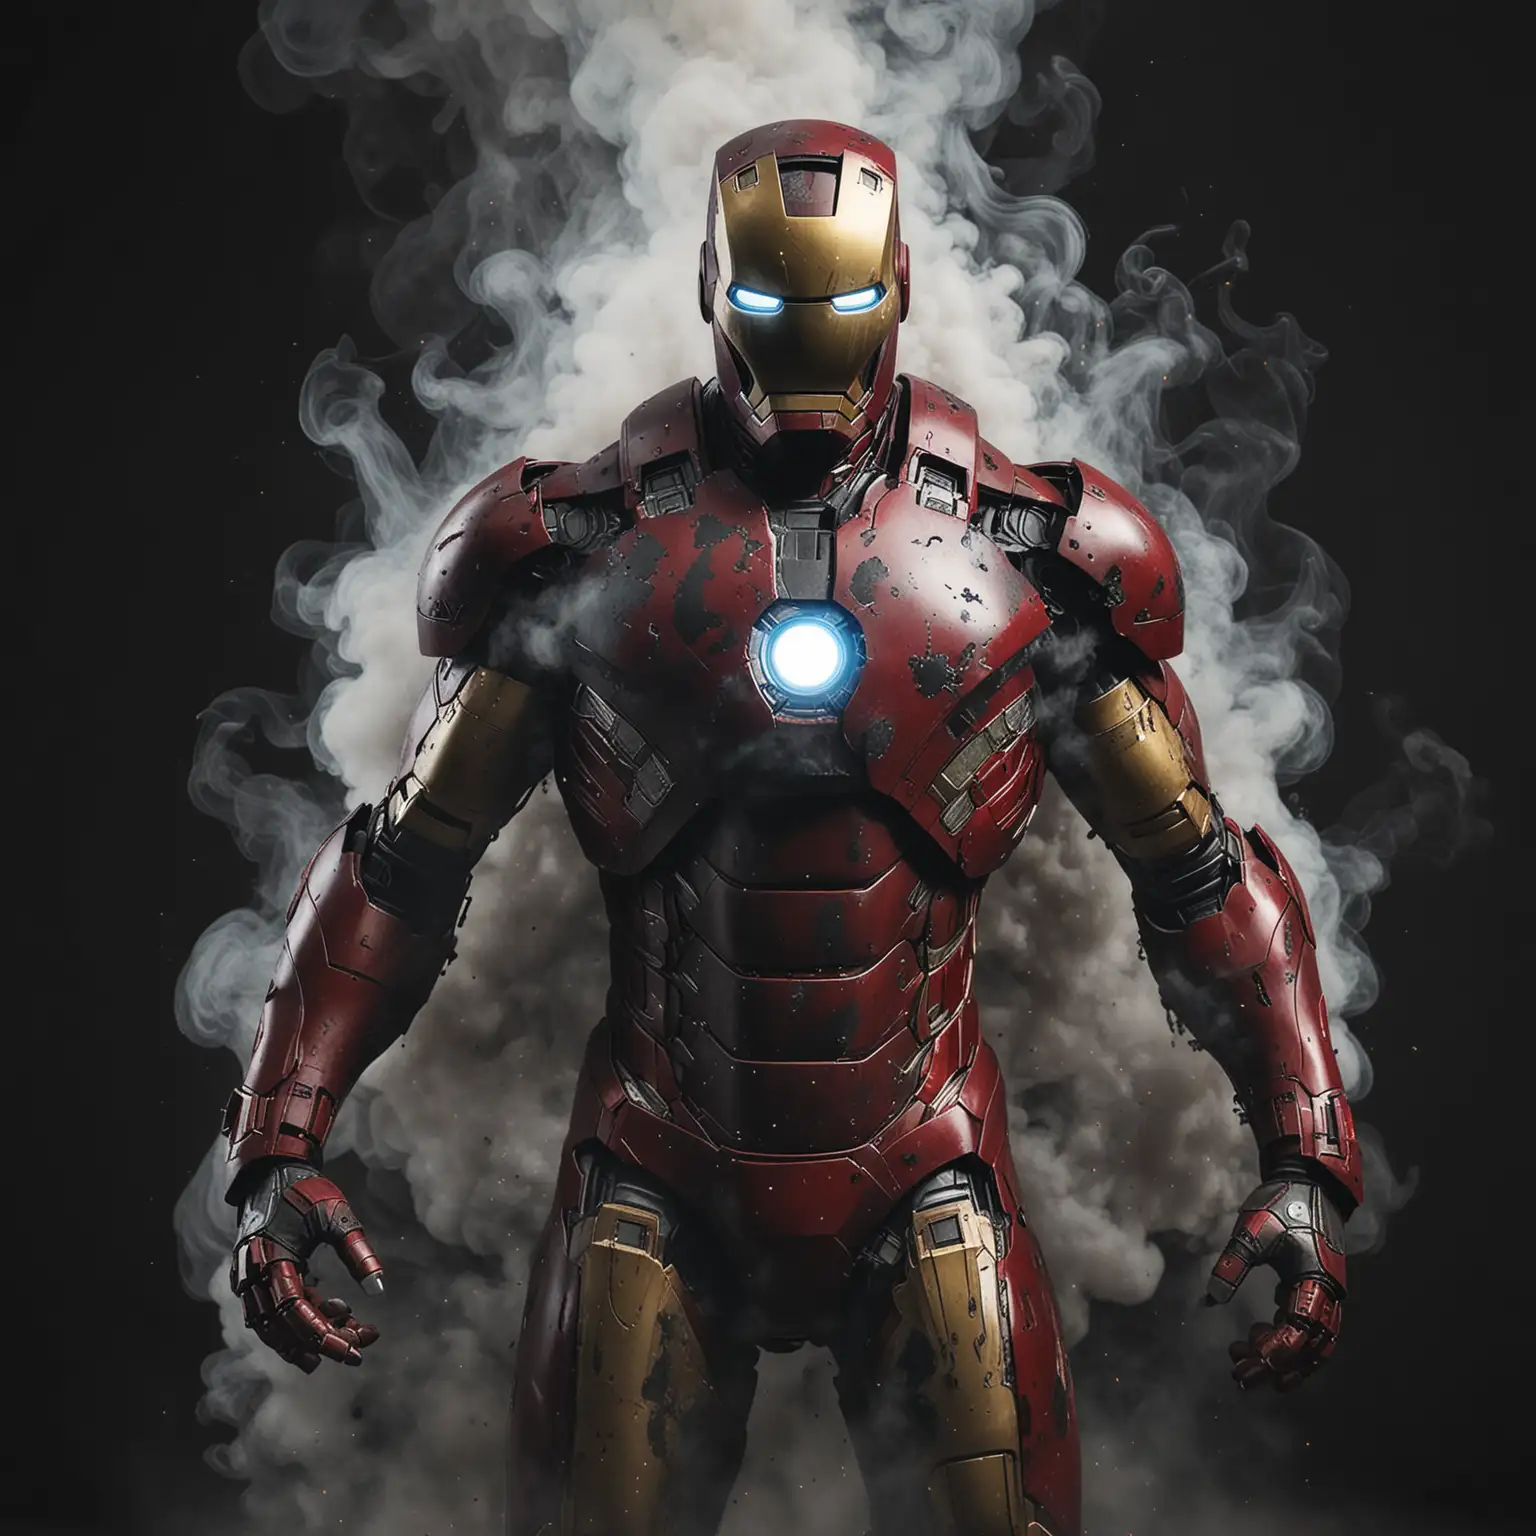 Iron Man Chest Emerges from Enigmatic Black Smoke